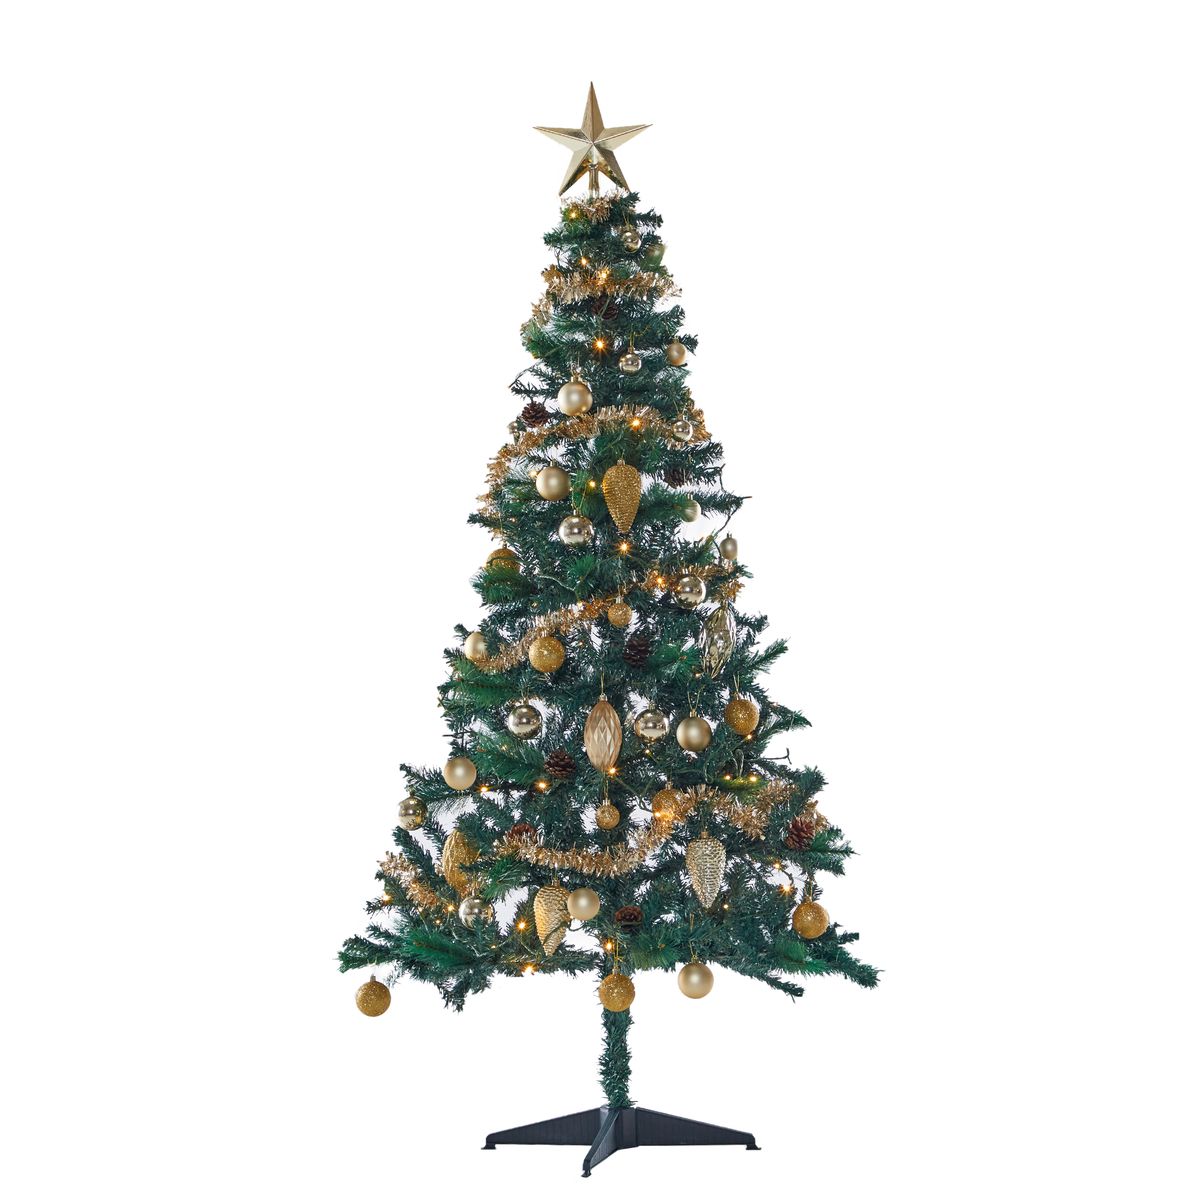 Northern Lights 1.8m Golden Christmas Tree with Pinecones, Lights & Decor